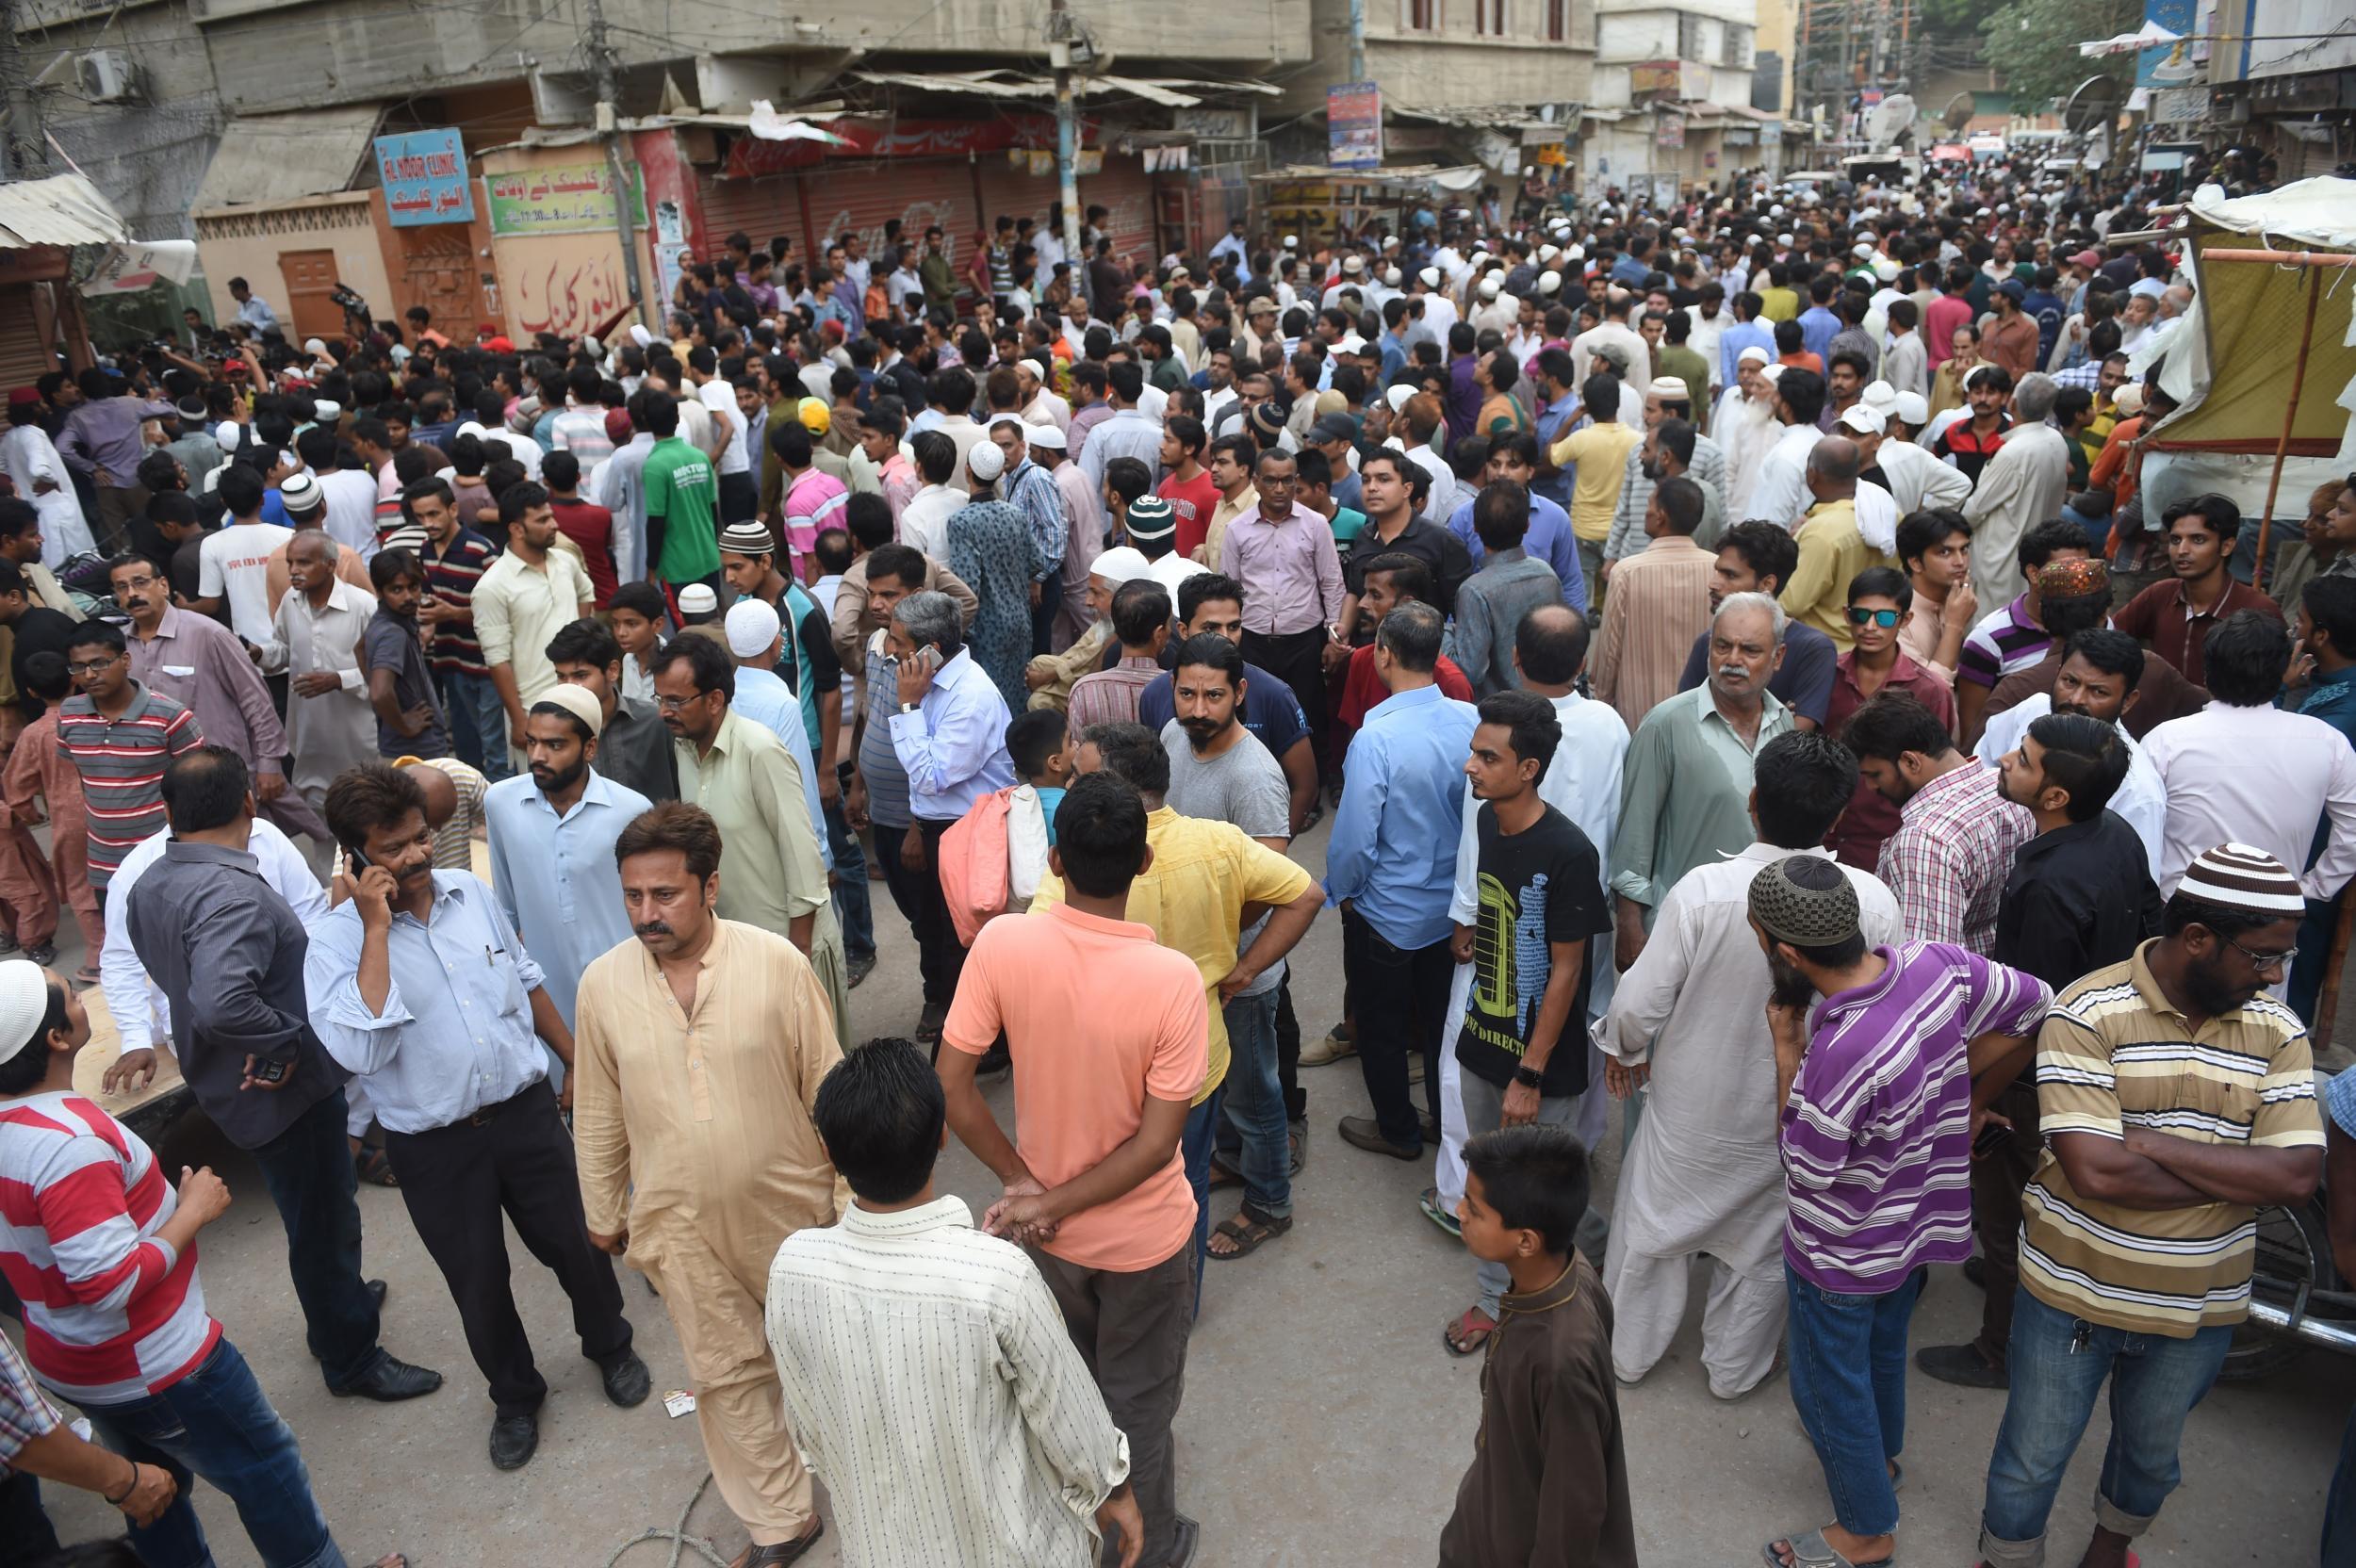 Fans, relatives and local residents gather outside of Amjad Sabri's home in Karachi